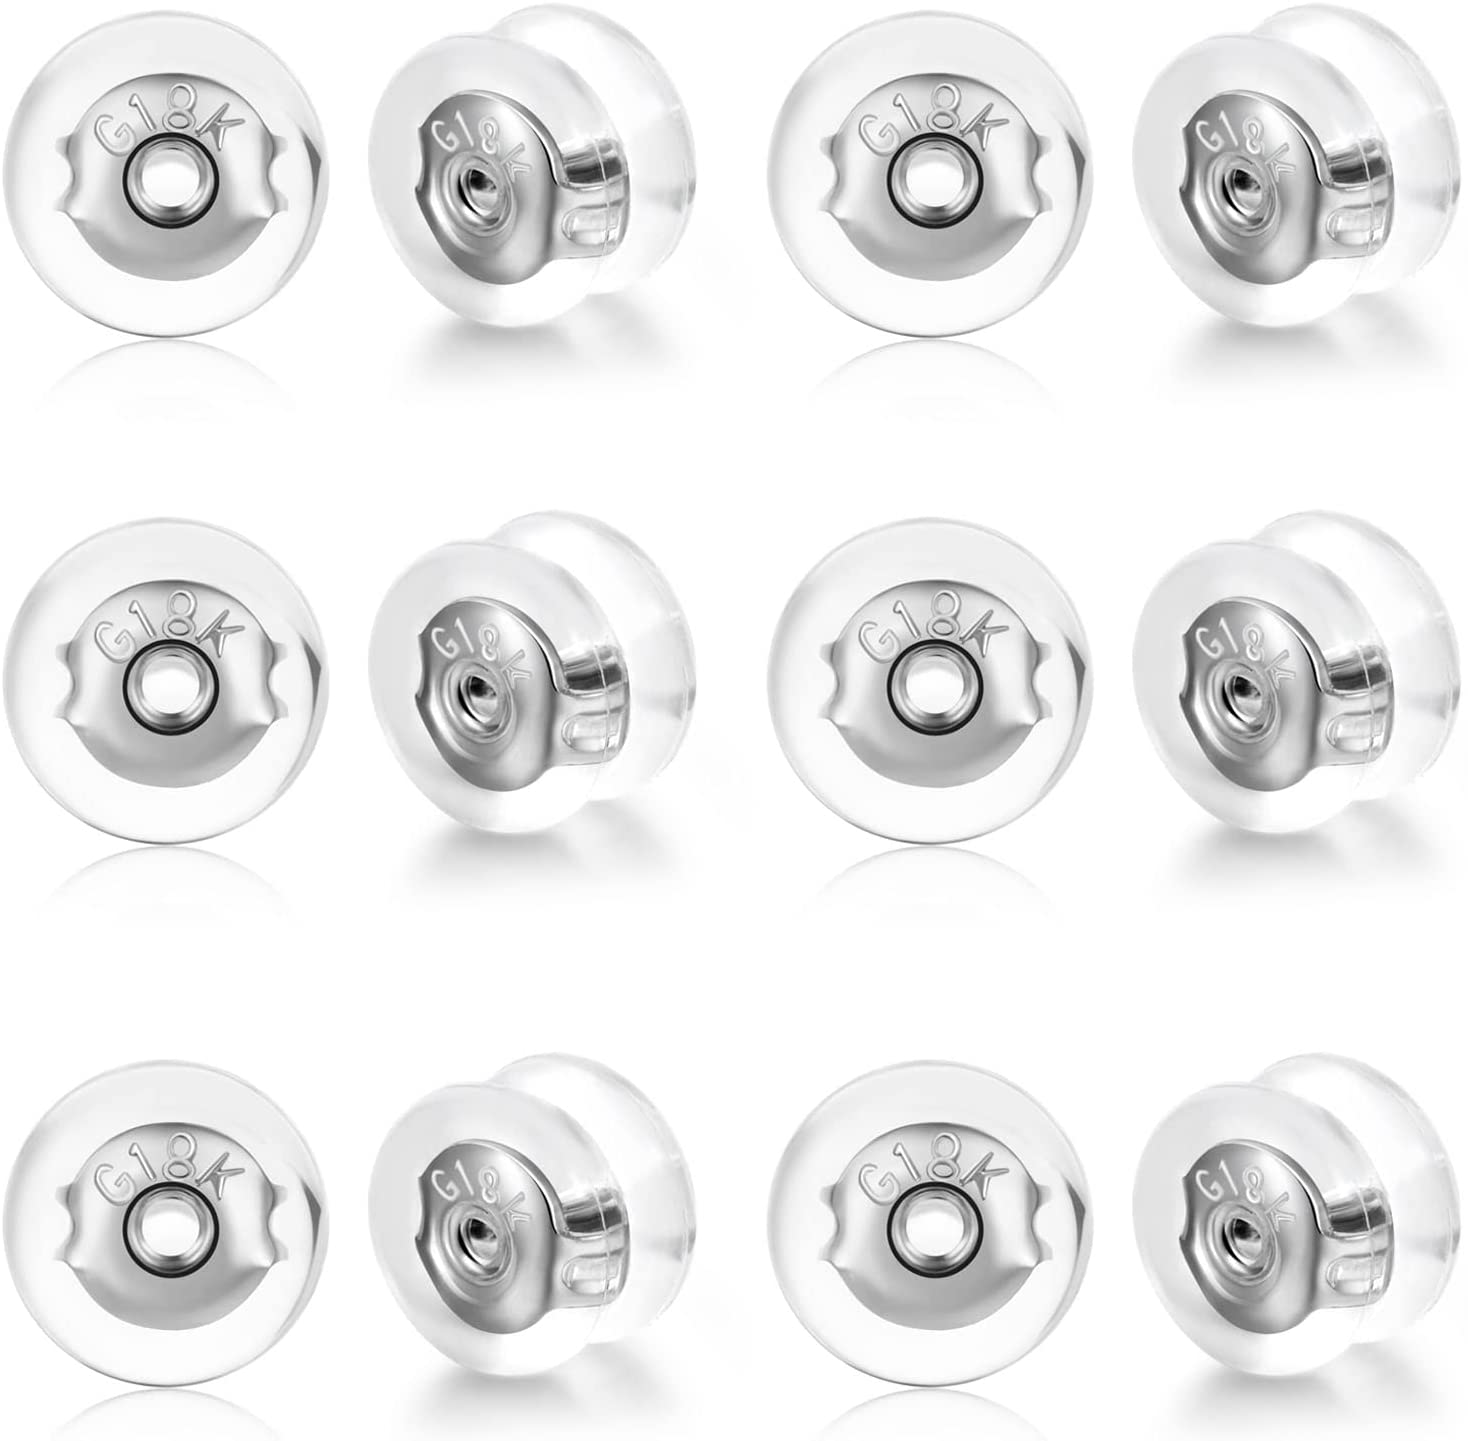 18K Gold Locking Secure Earring Backs for Studs, Silicone Earring Backs Replacements for Studs/Droopy Ears, No-Irritate Hypoallergenice Earring Backs for Adults&Kids (White Gold) - image 1 of 5